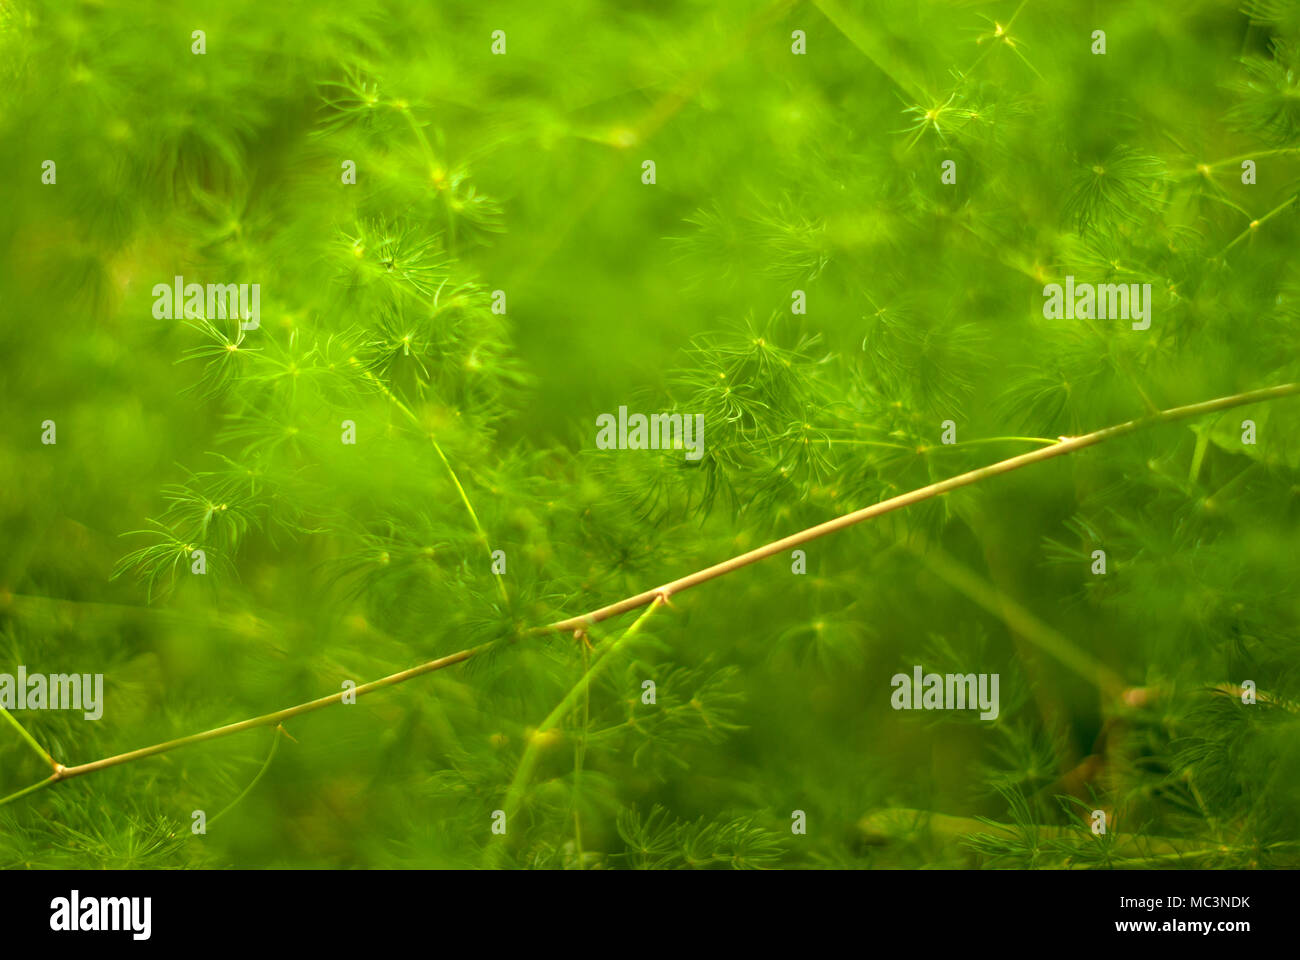 green blurred plant background with thin branches Stock Photo